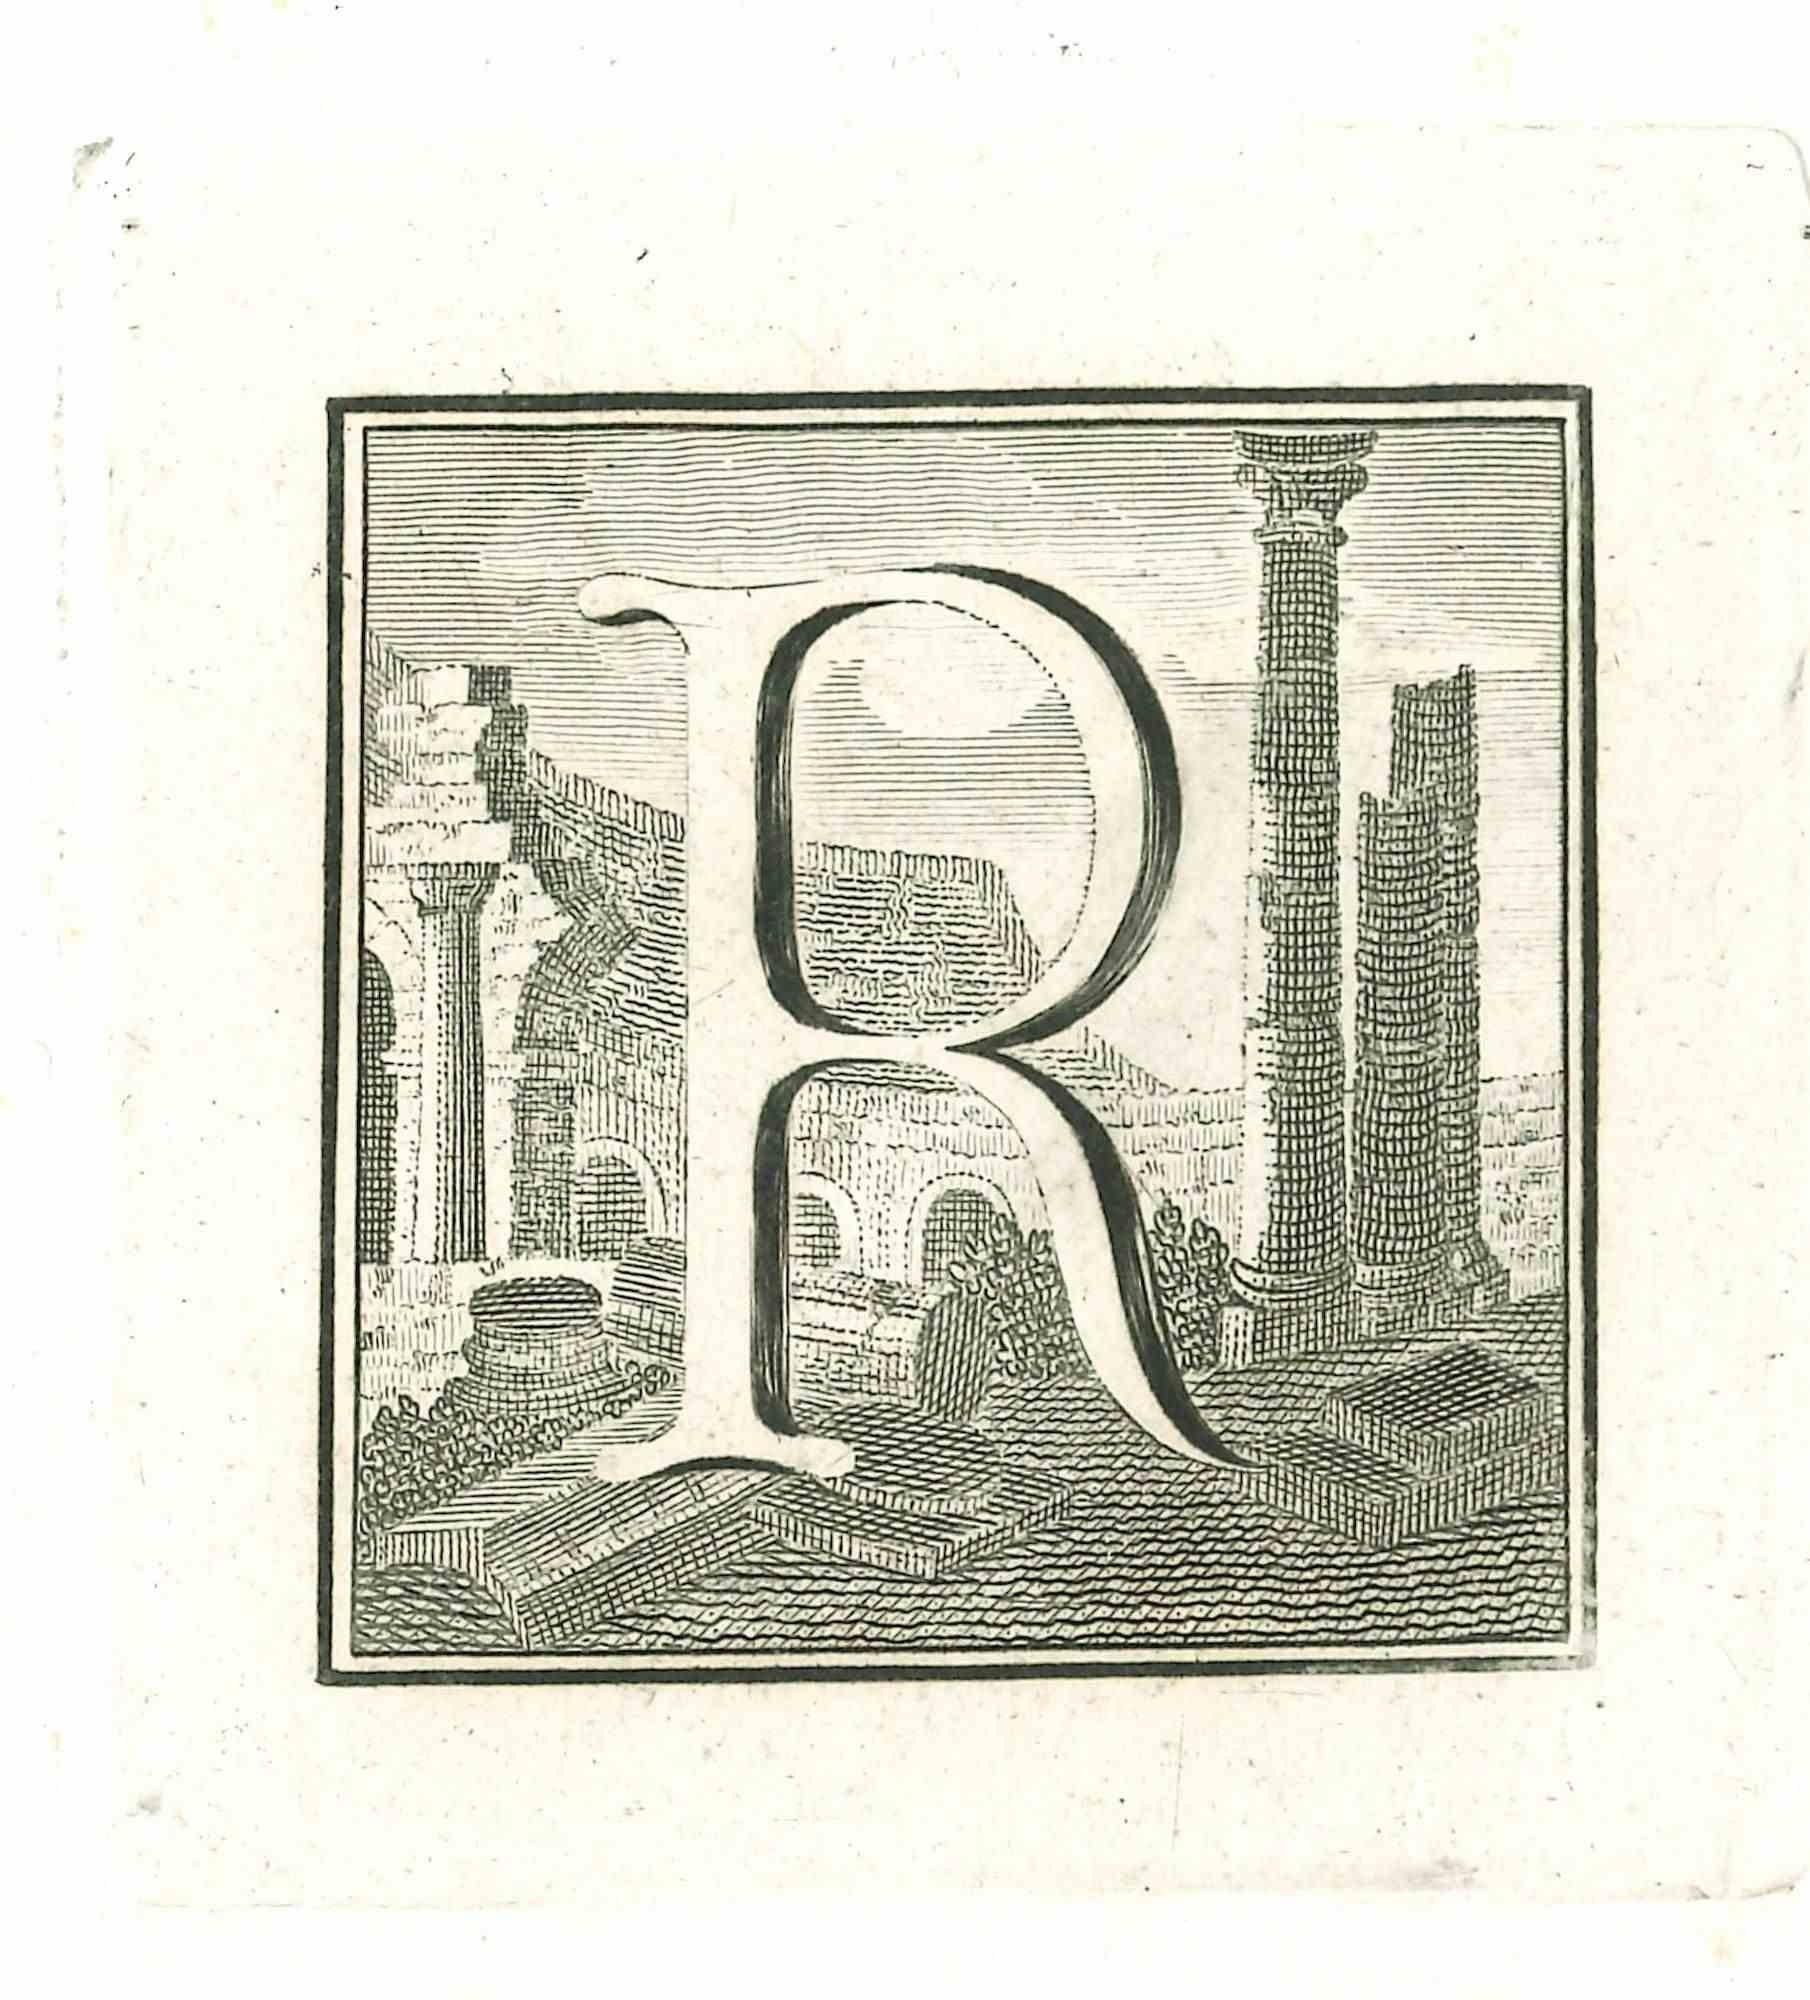 Capital Letter for the Antiquities of Herculaneum Exposed-Etching - 18th Century